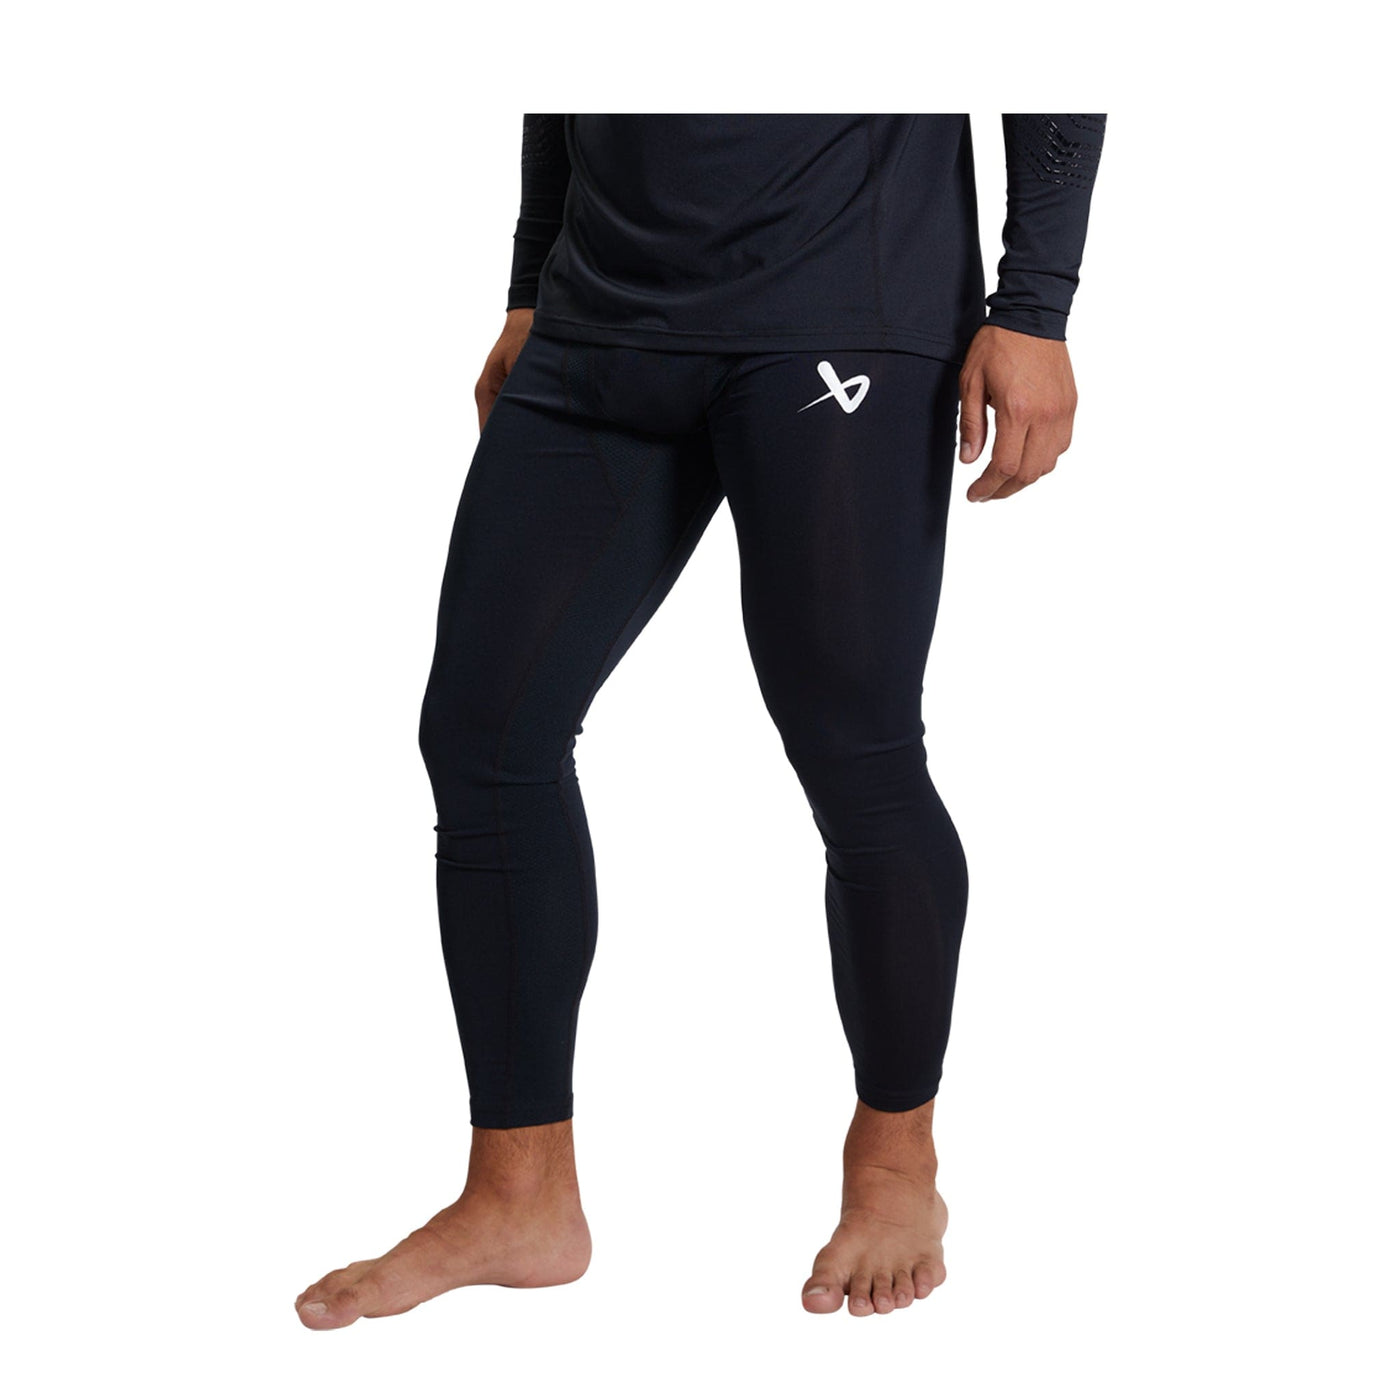 Bauer Pro Senior Baselayer Pants - The Hockey Shop Source For Sports